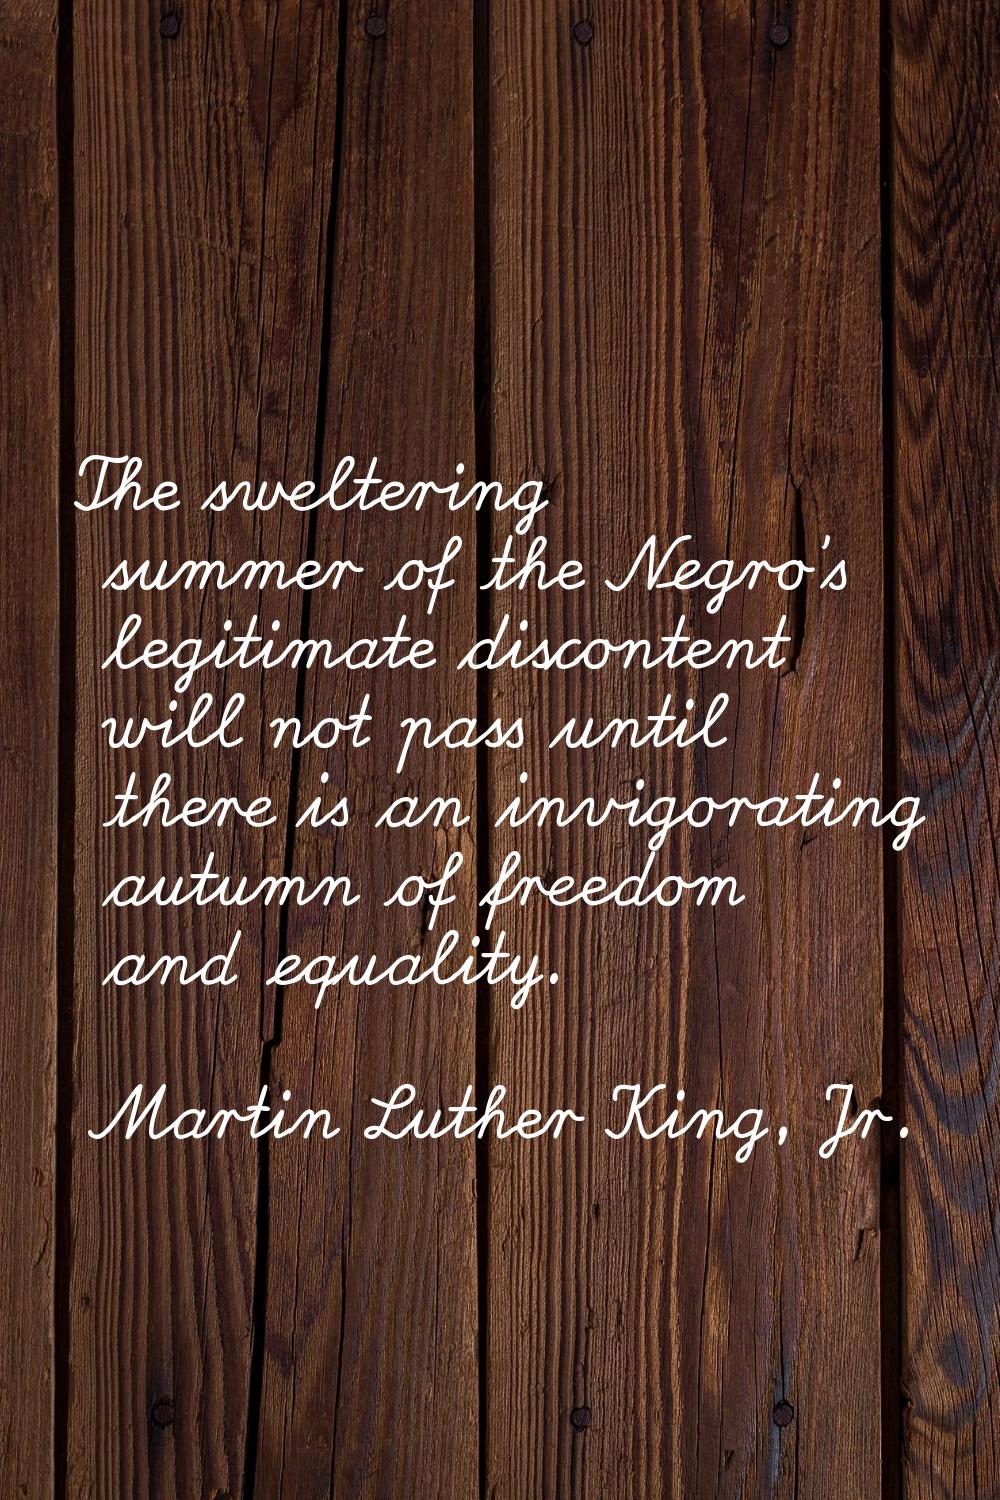 The sweltering summer of the Negro's legitimate discontent will not pass until there is an invigora